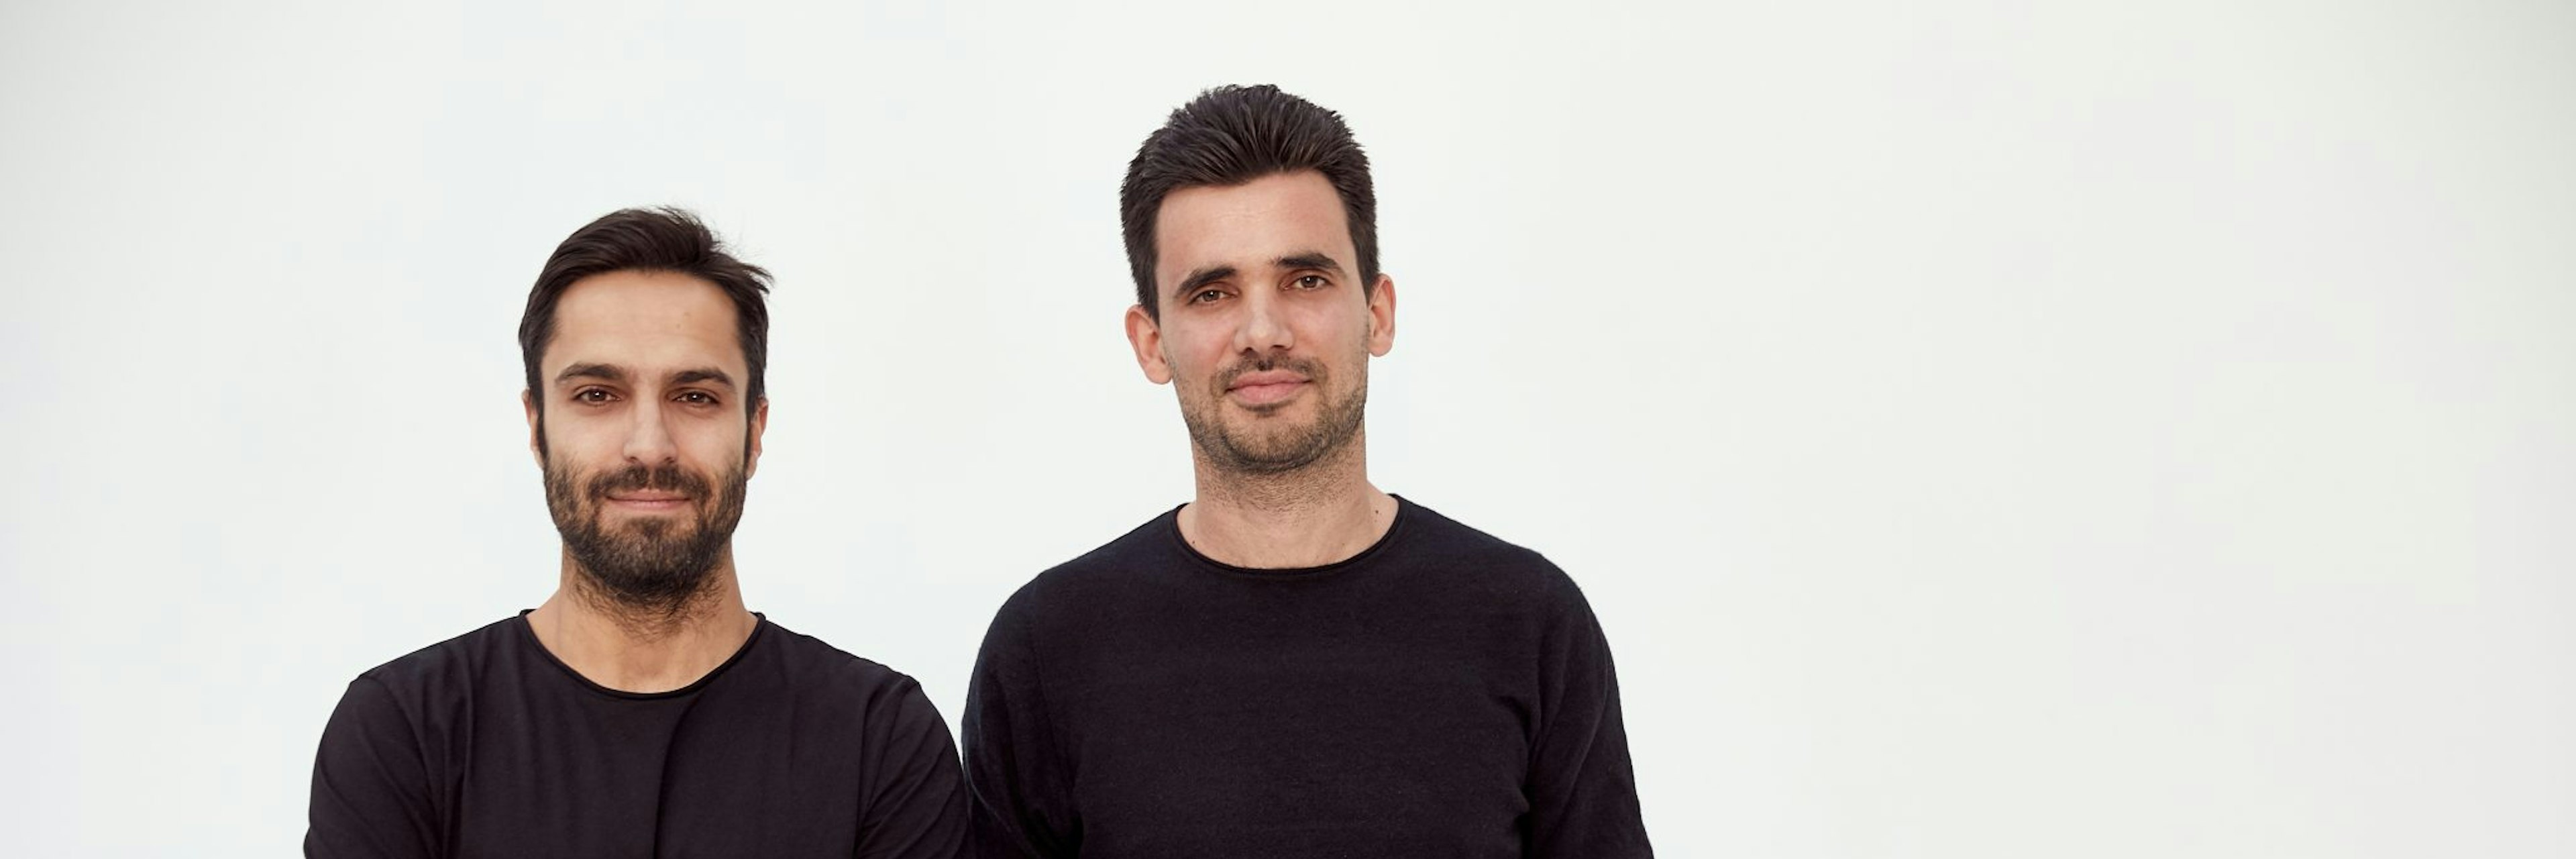 A photo of Voodoo founders Alexandre Yazdi and Laurent Ritter